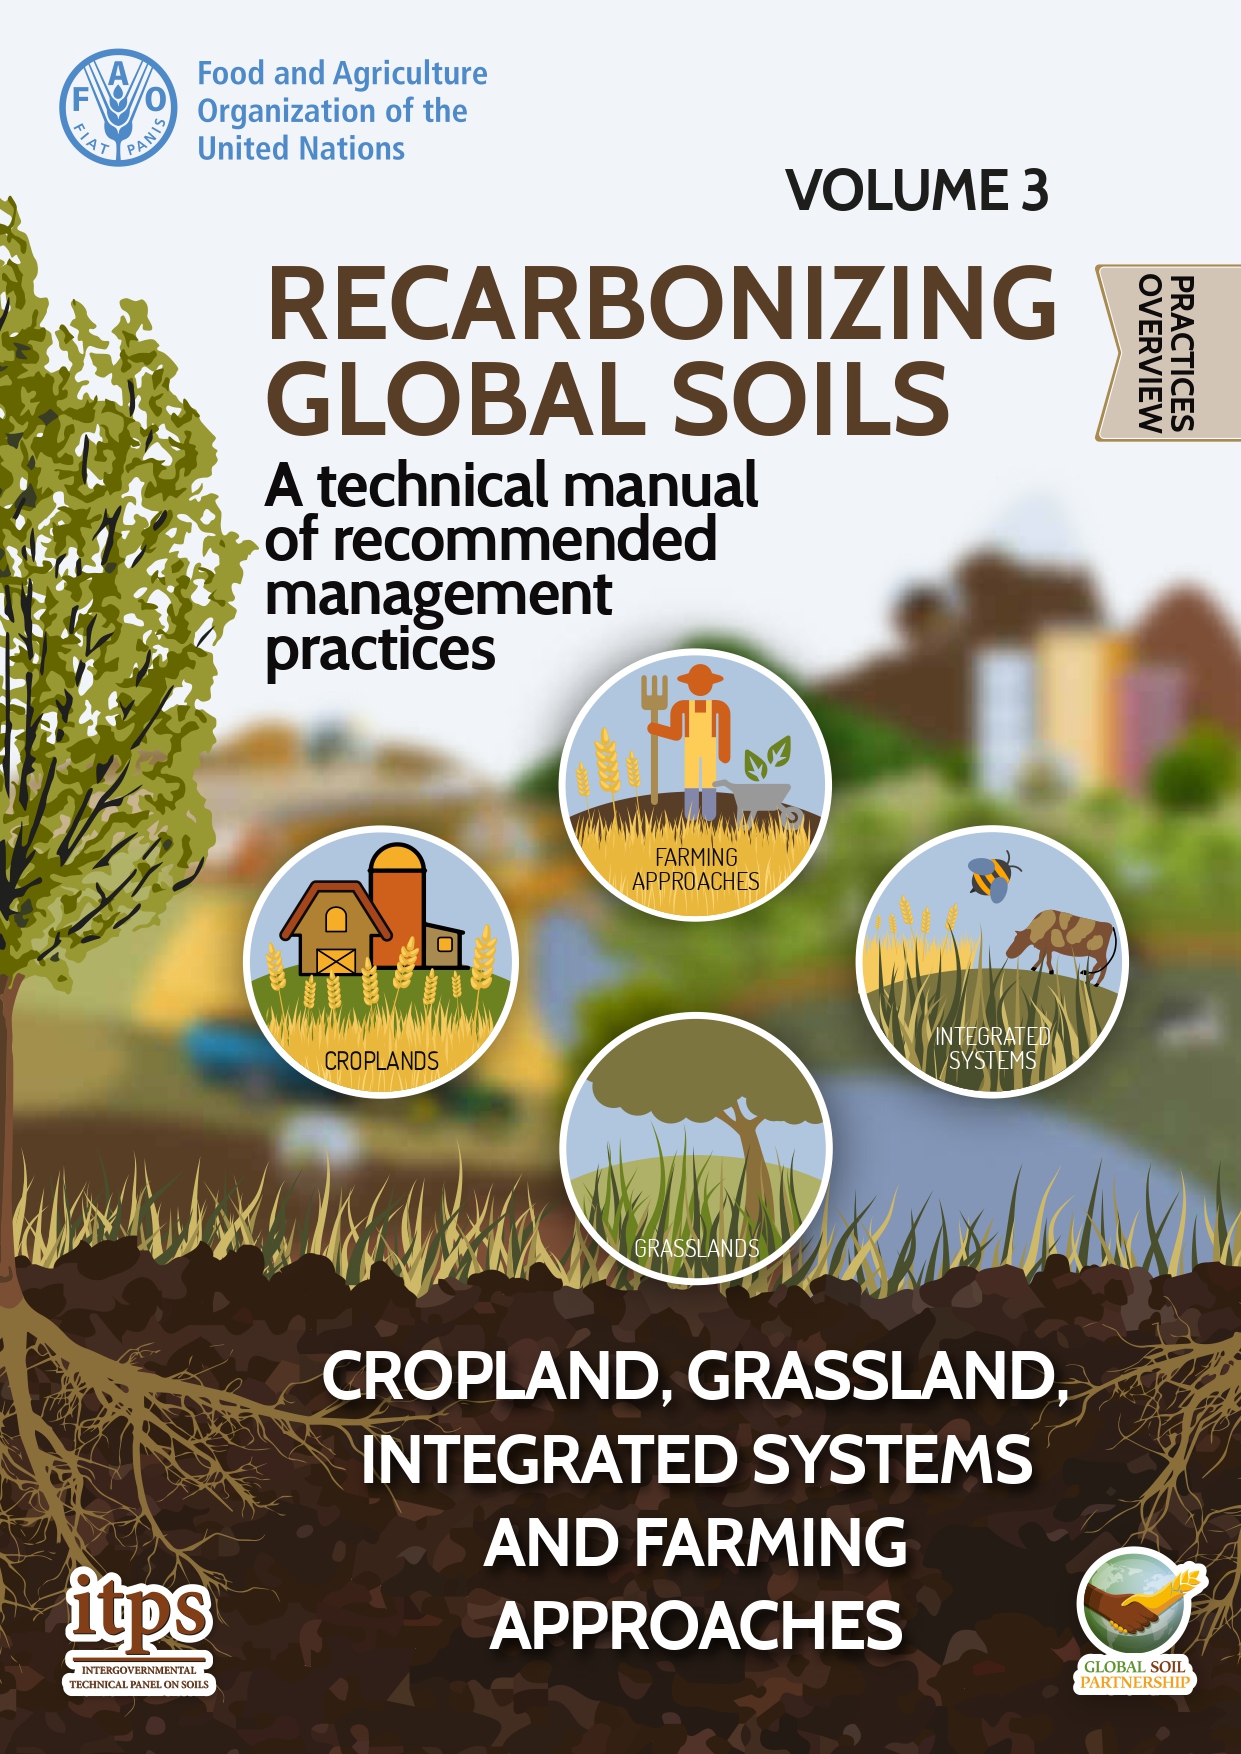 Recarbonizing global soils – A technical manual of recommended management practices